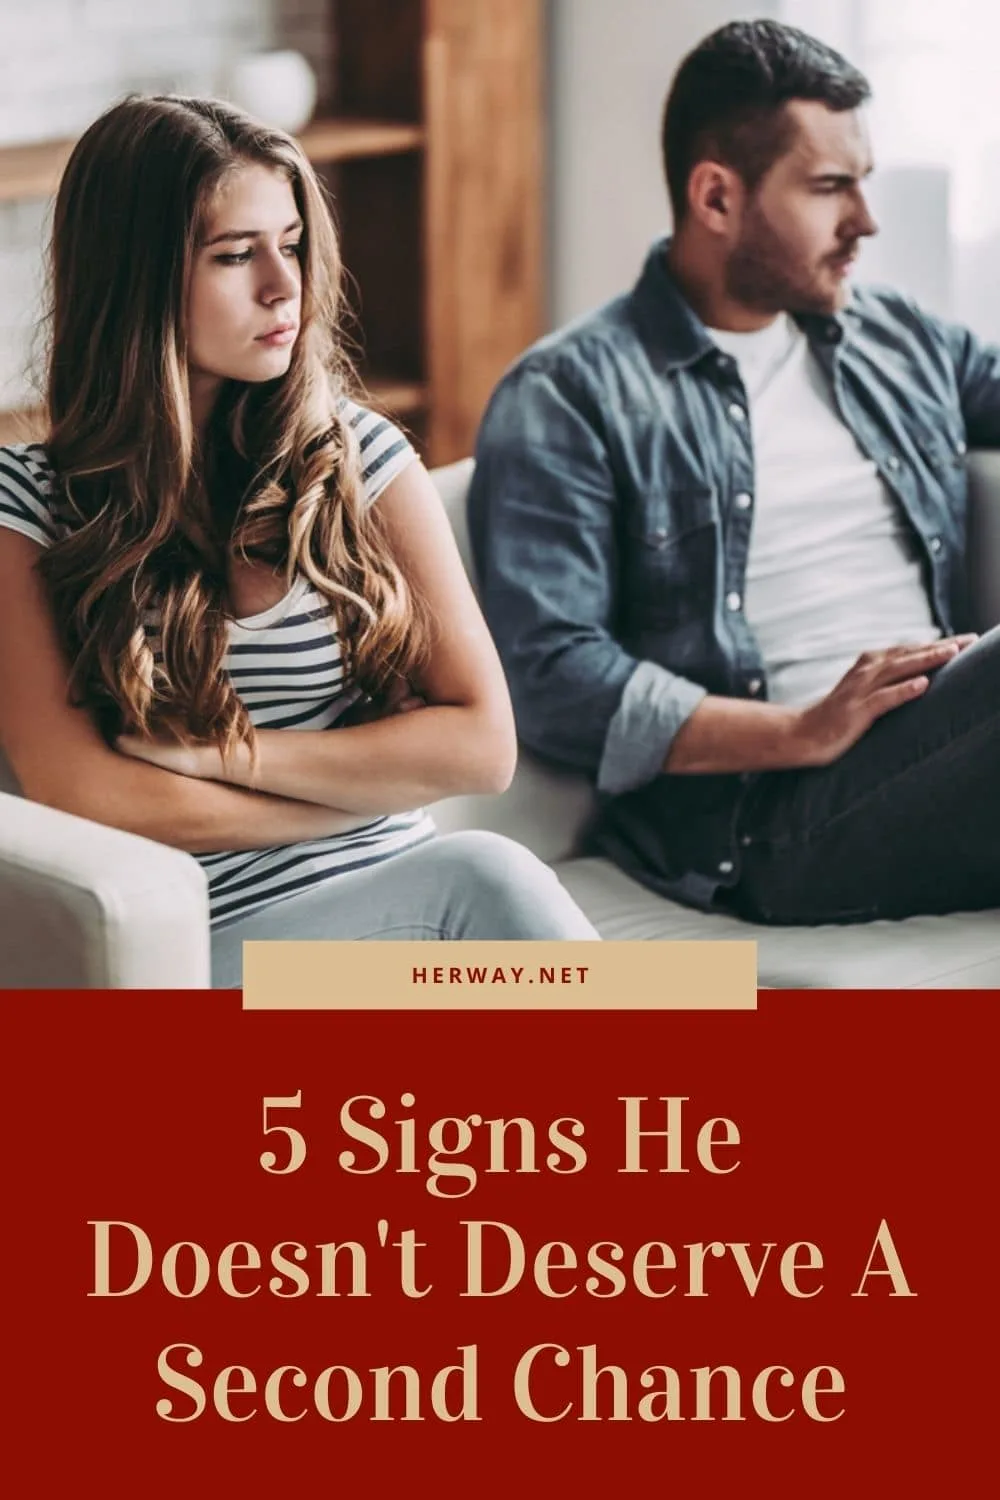 5 Signs He Doesn't Deserve A Second Chance